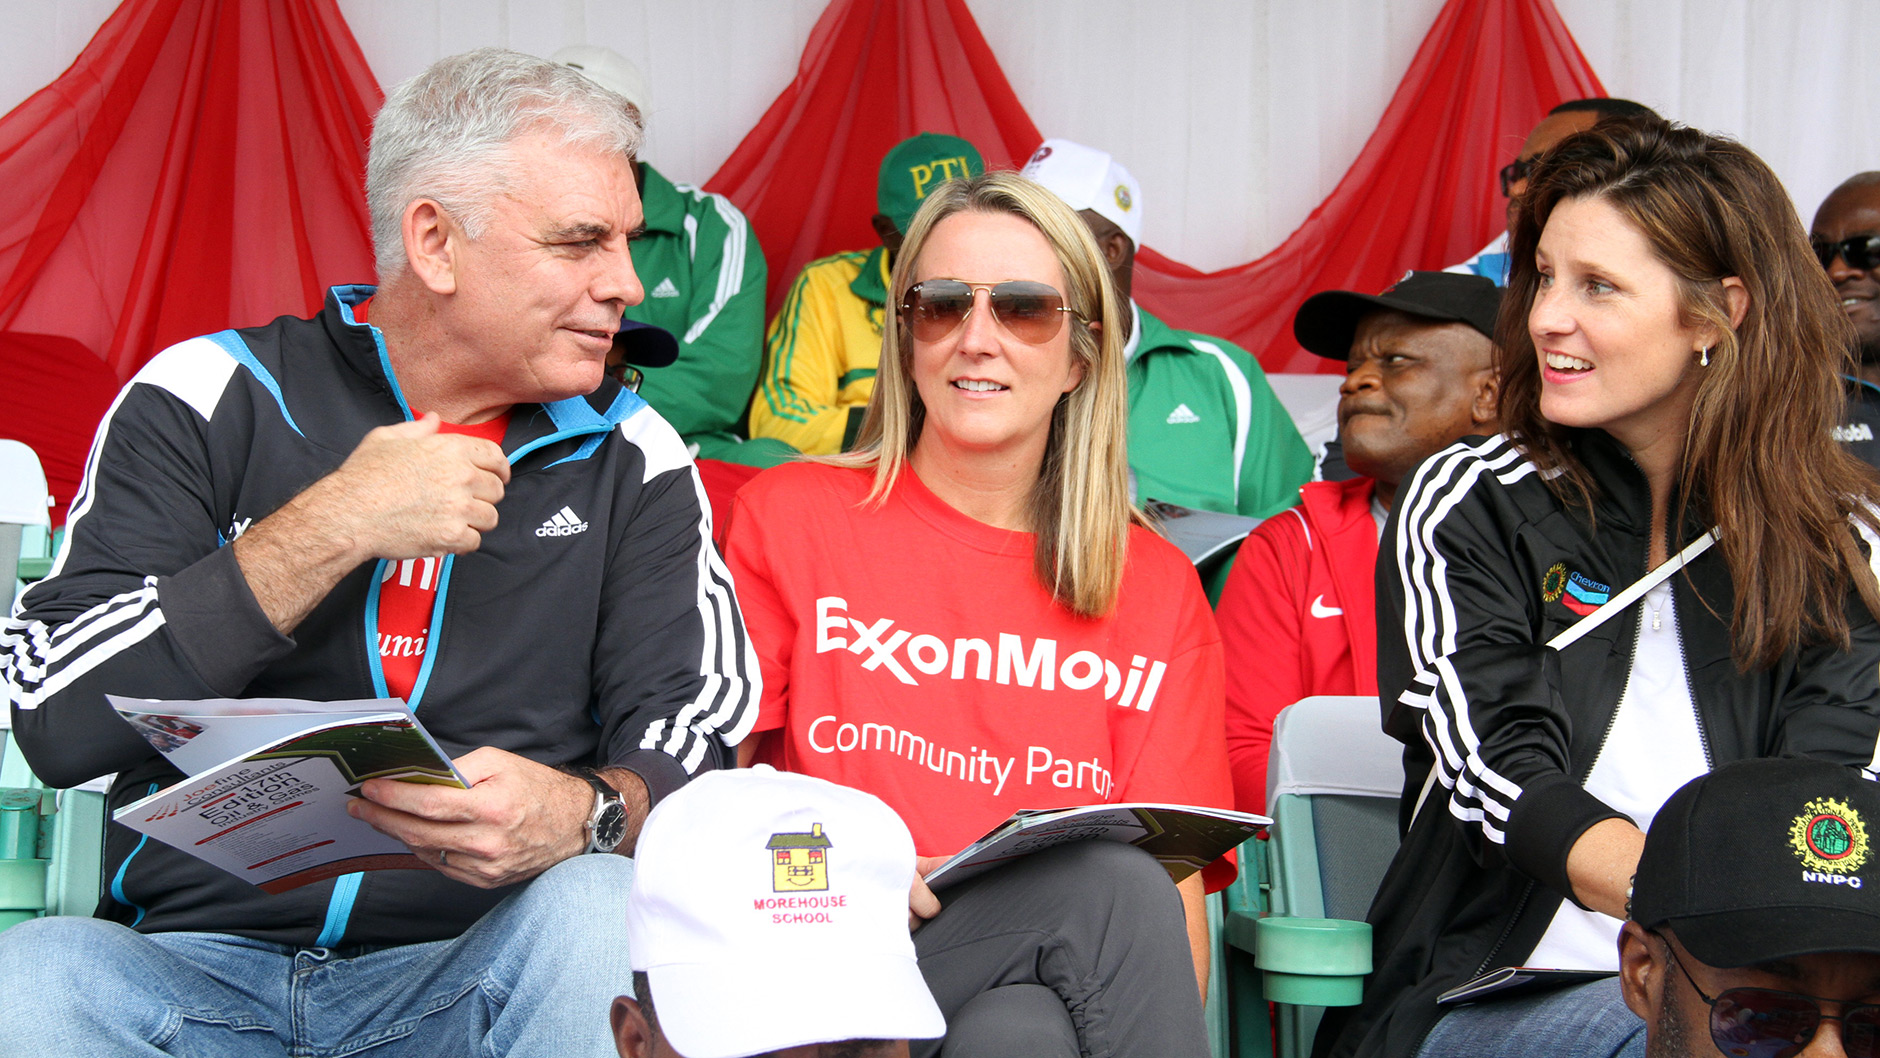 ExxonMobil at the 17th Nigeria Oil and Gas Industry Games in Lagos, Nigeria.